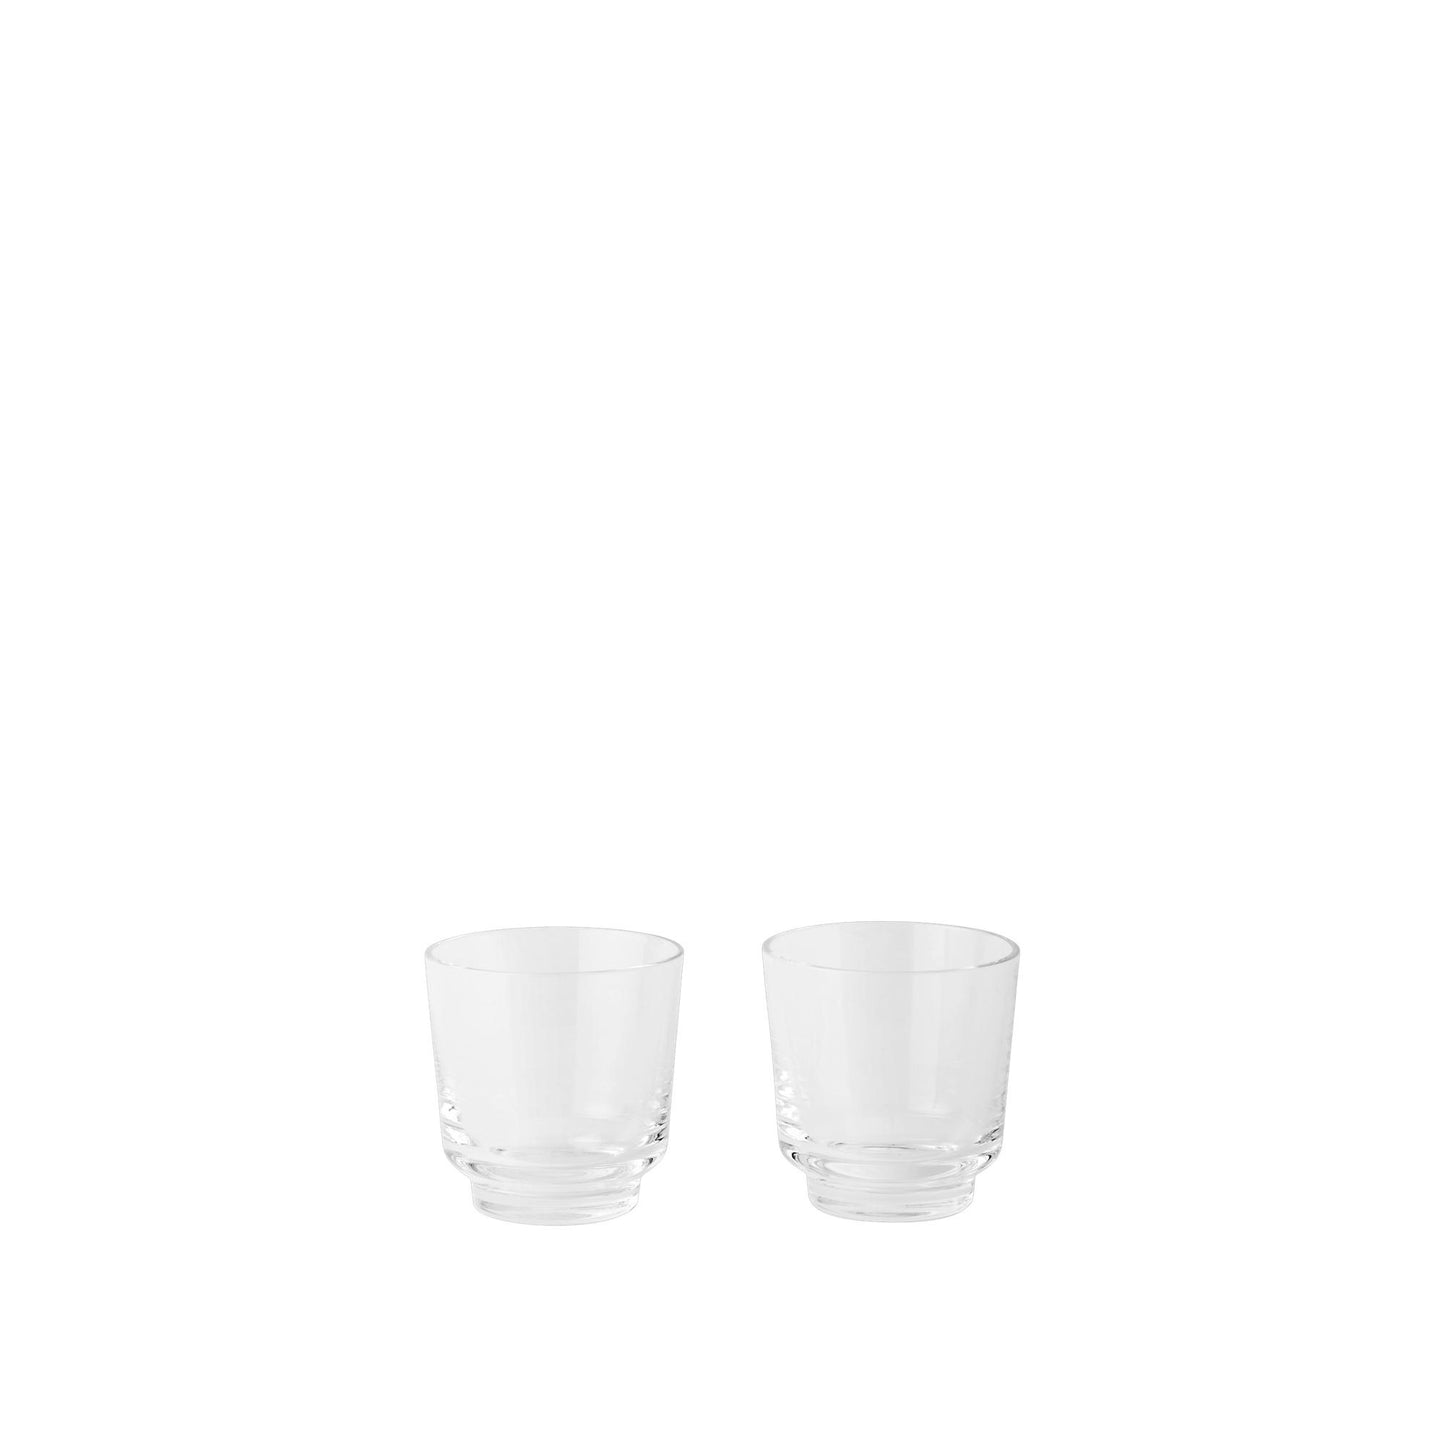 Raise Glass Set of 2 20 Cl by Muuto #Clear